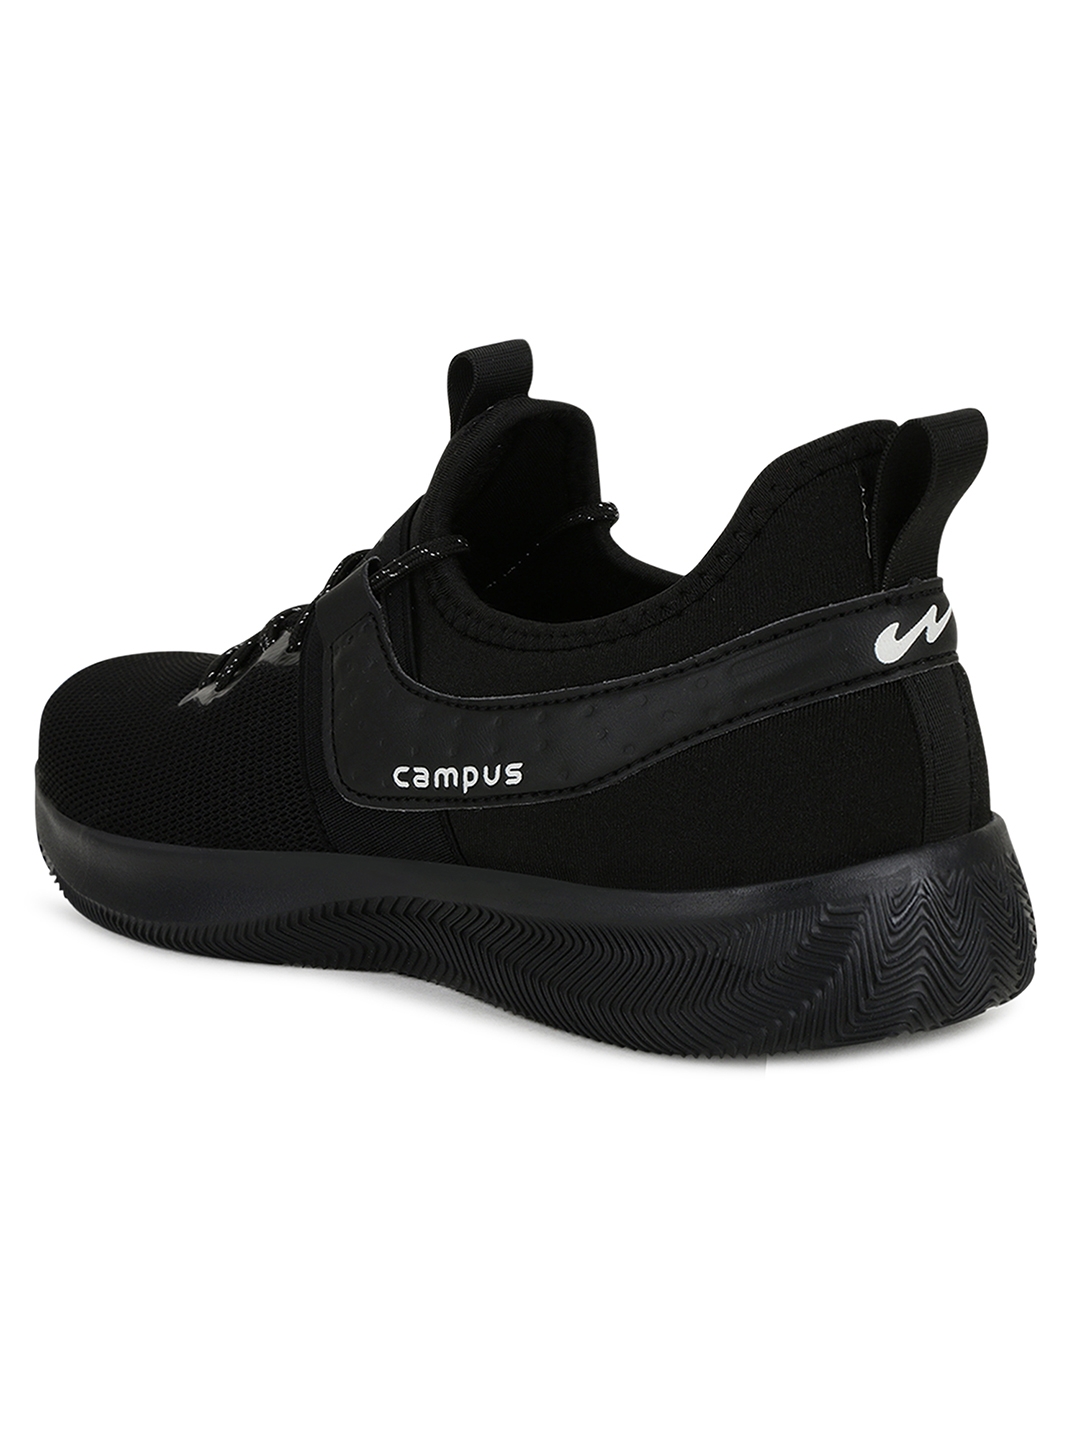 Campus Shoes | Black Sherry Running Shoes